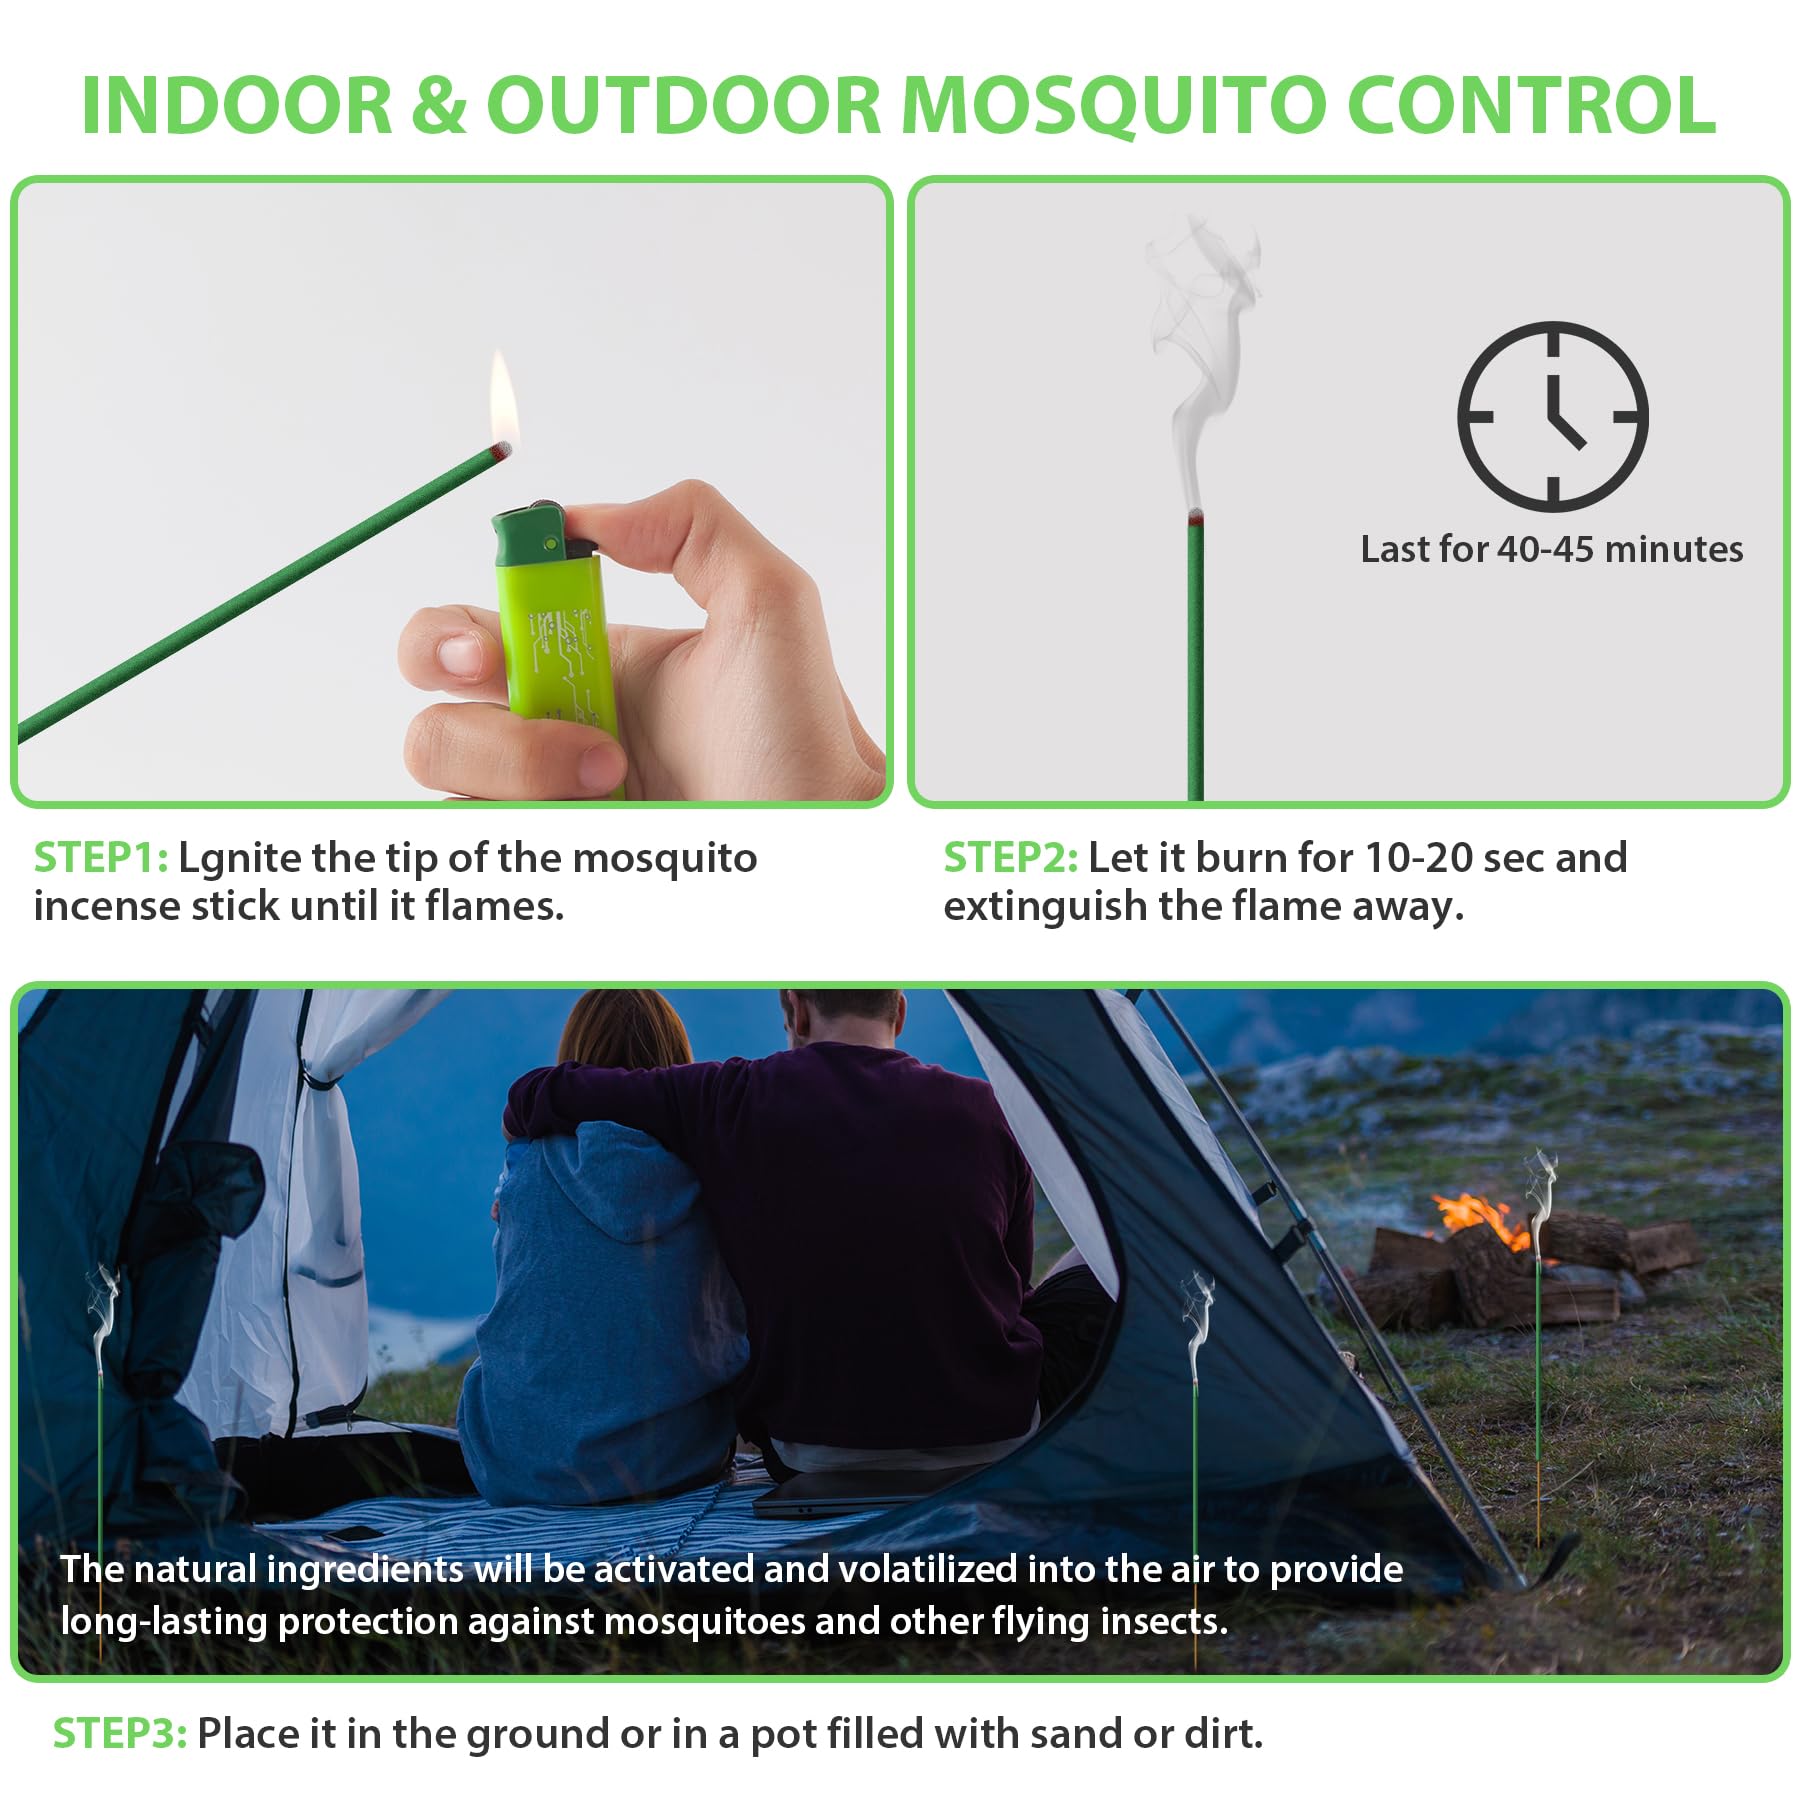 TRAP IT! Mosquito Repellent Outdoor Patio, 120 PCS Natural Plant-Based Citronella Oil Incense Sticks Indoor Home Pet Family Safe, DEET Free Bug Insect Control Repellent for Yard Garden Camping Fishing